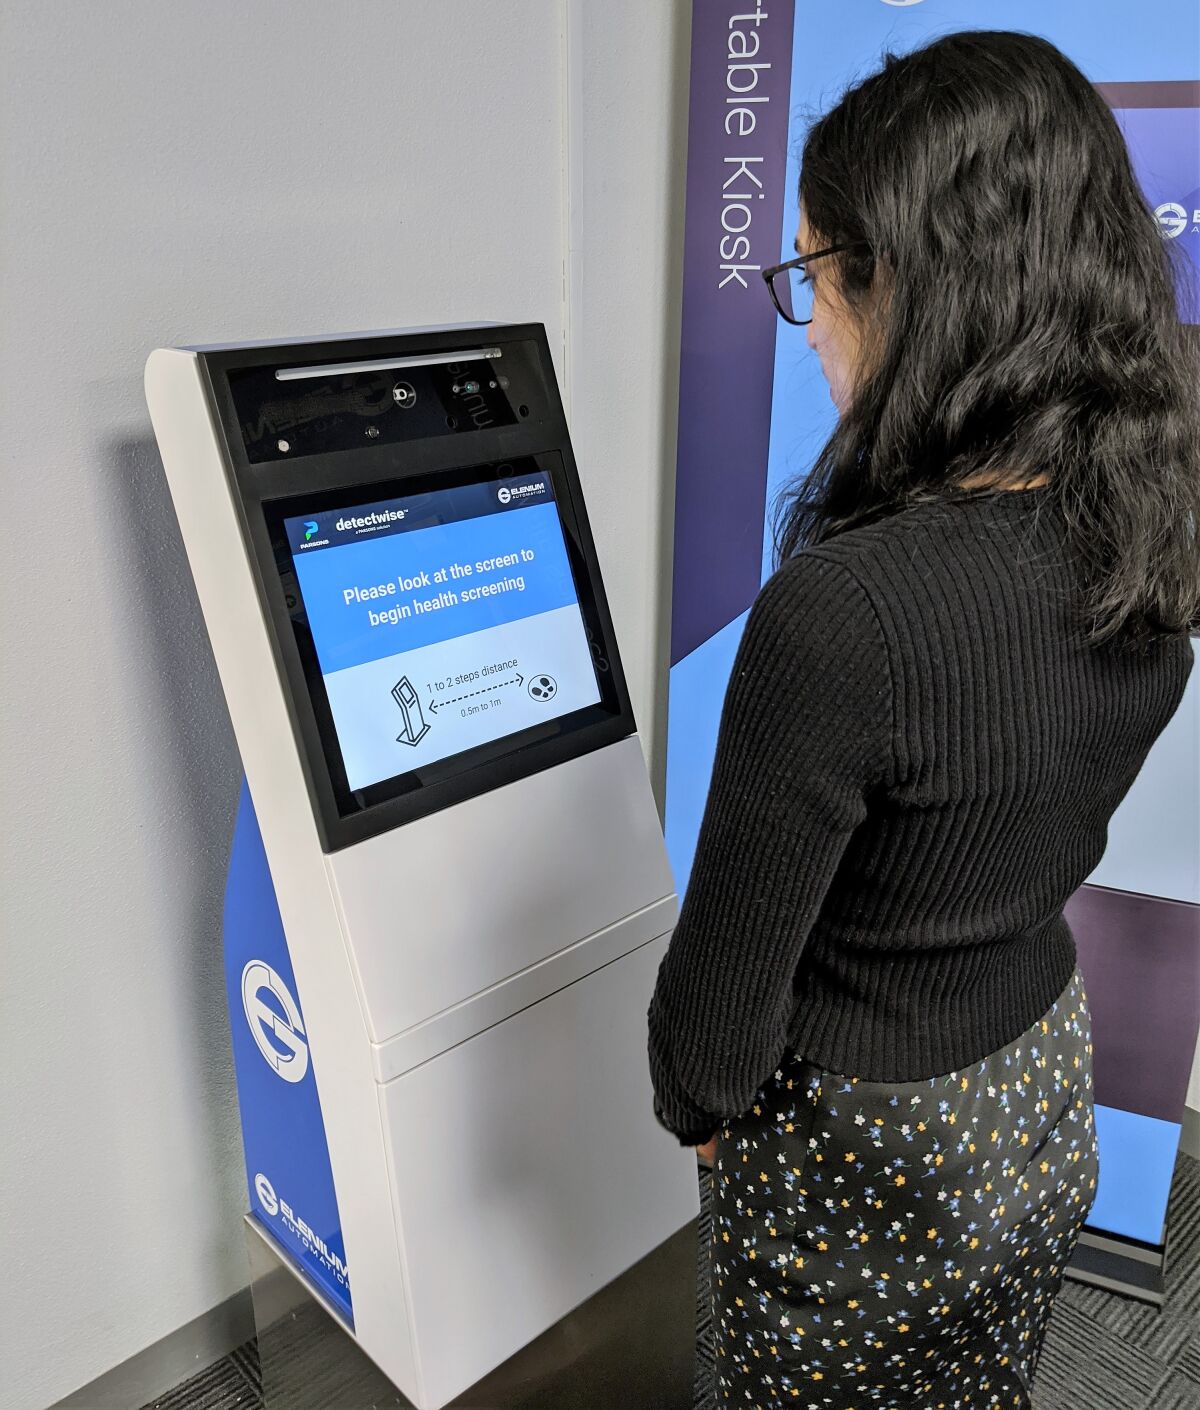 Parsons had developed a touch-less kiosk to screen for coronavirus.